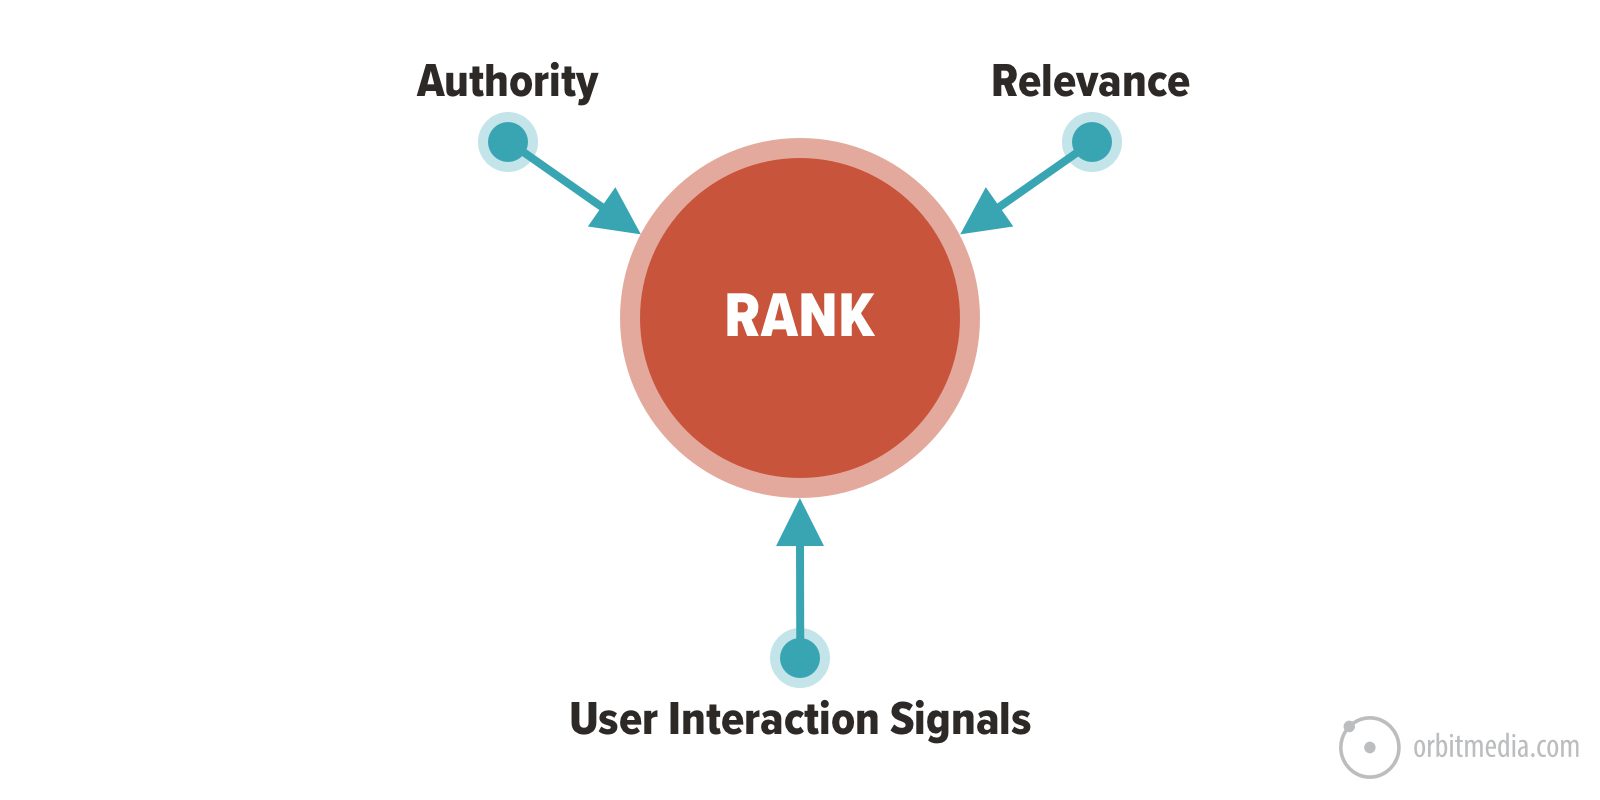 arrows showing that authority, relevance and user interaction signals are ranking factors